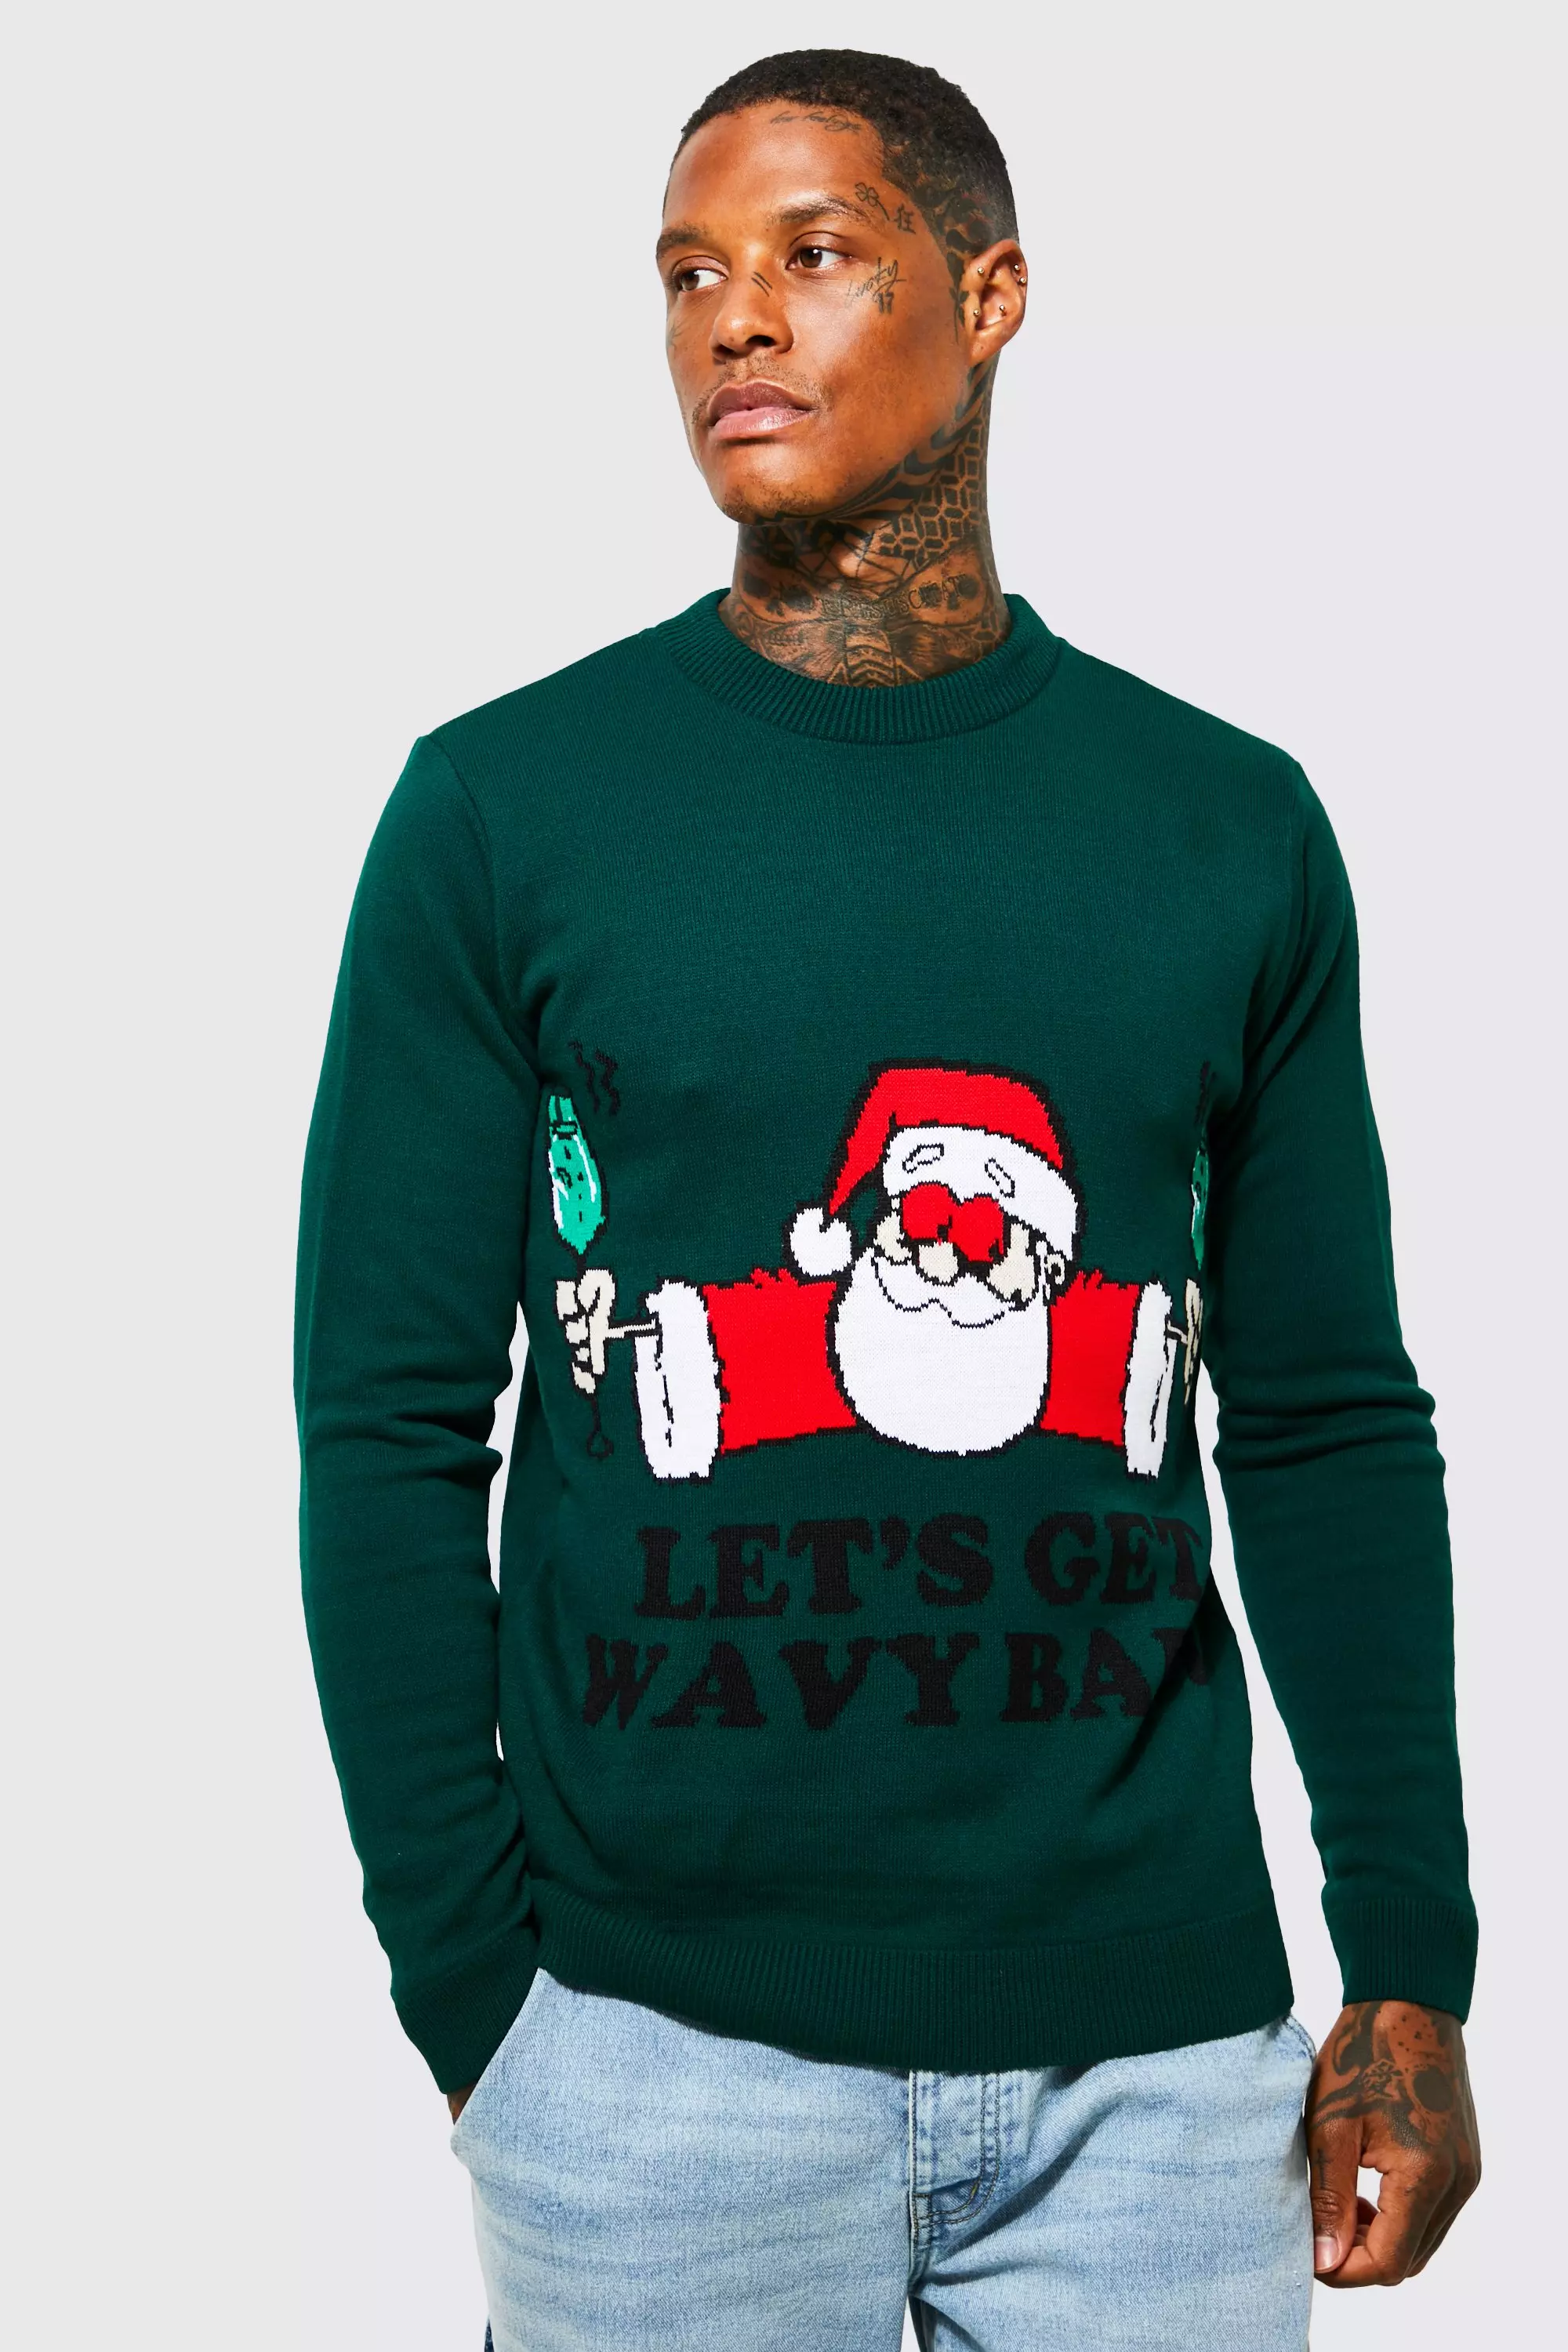 Green Lets Get Wavy Baby Christmas Sweater